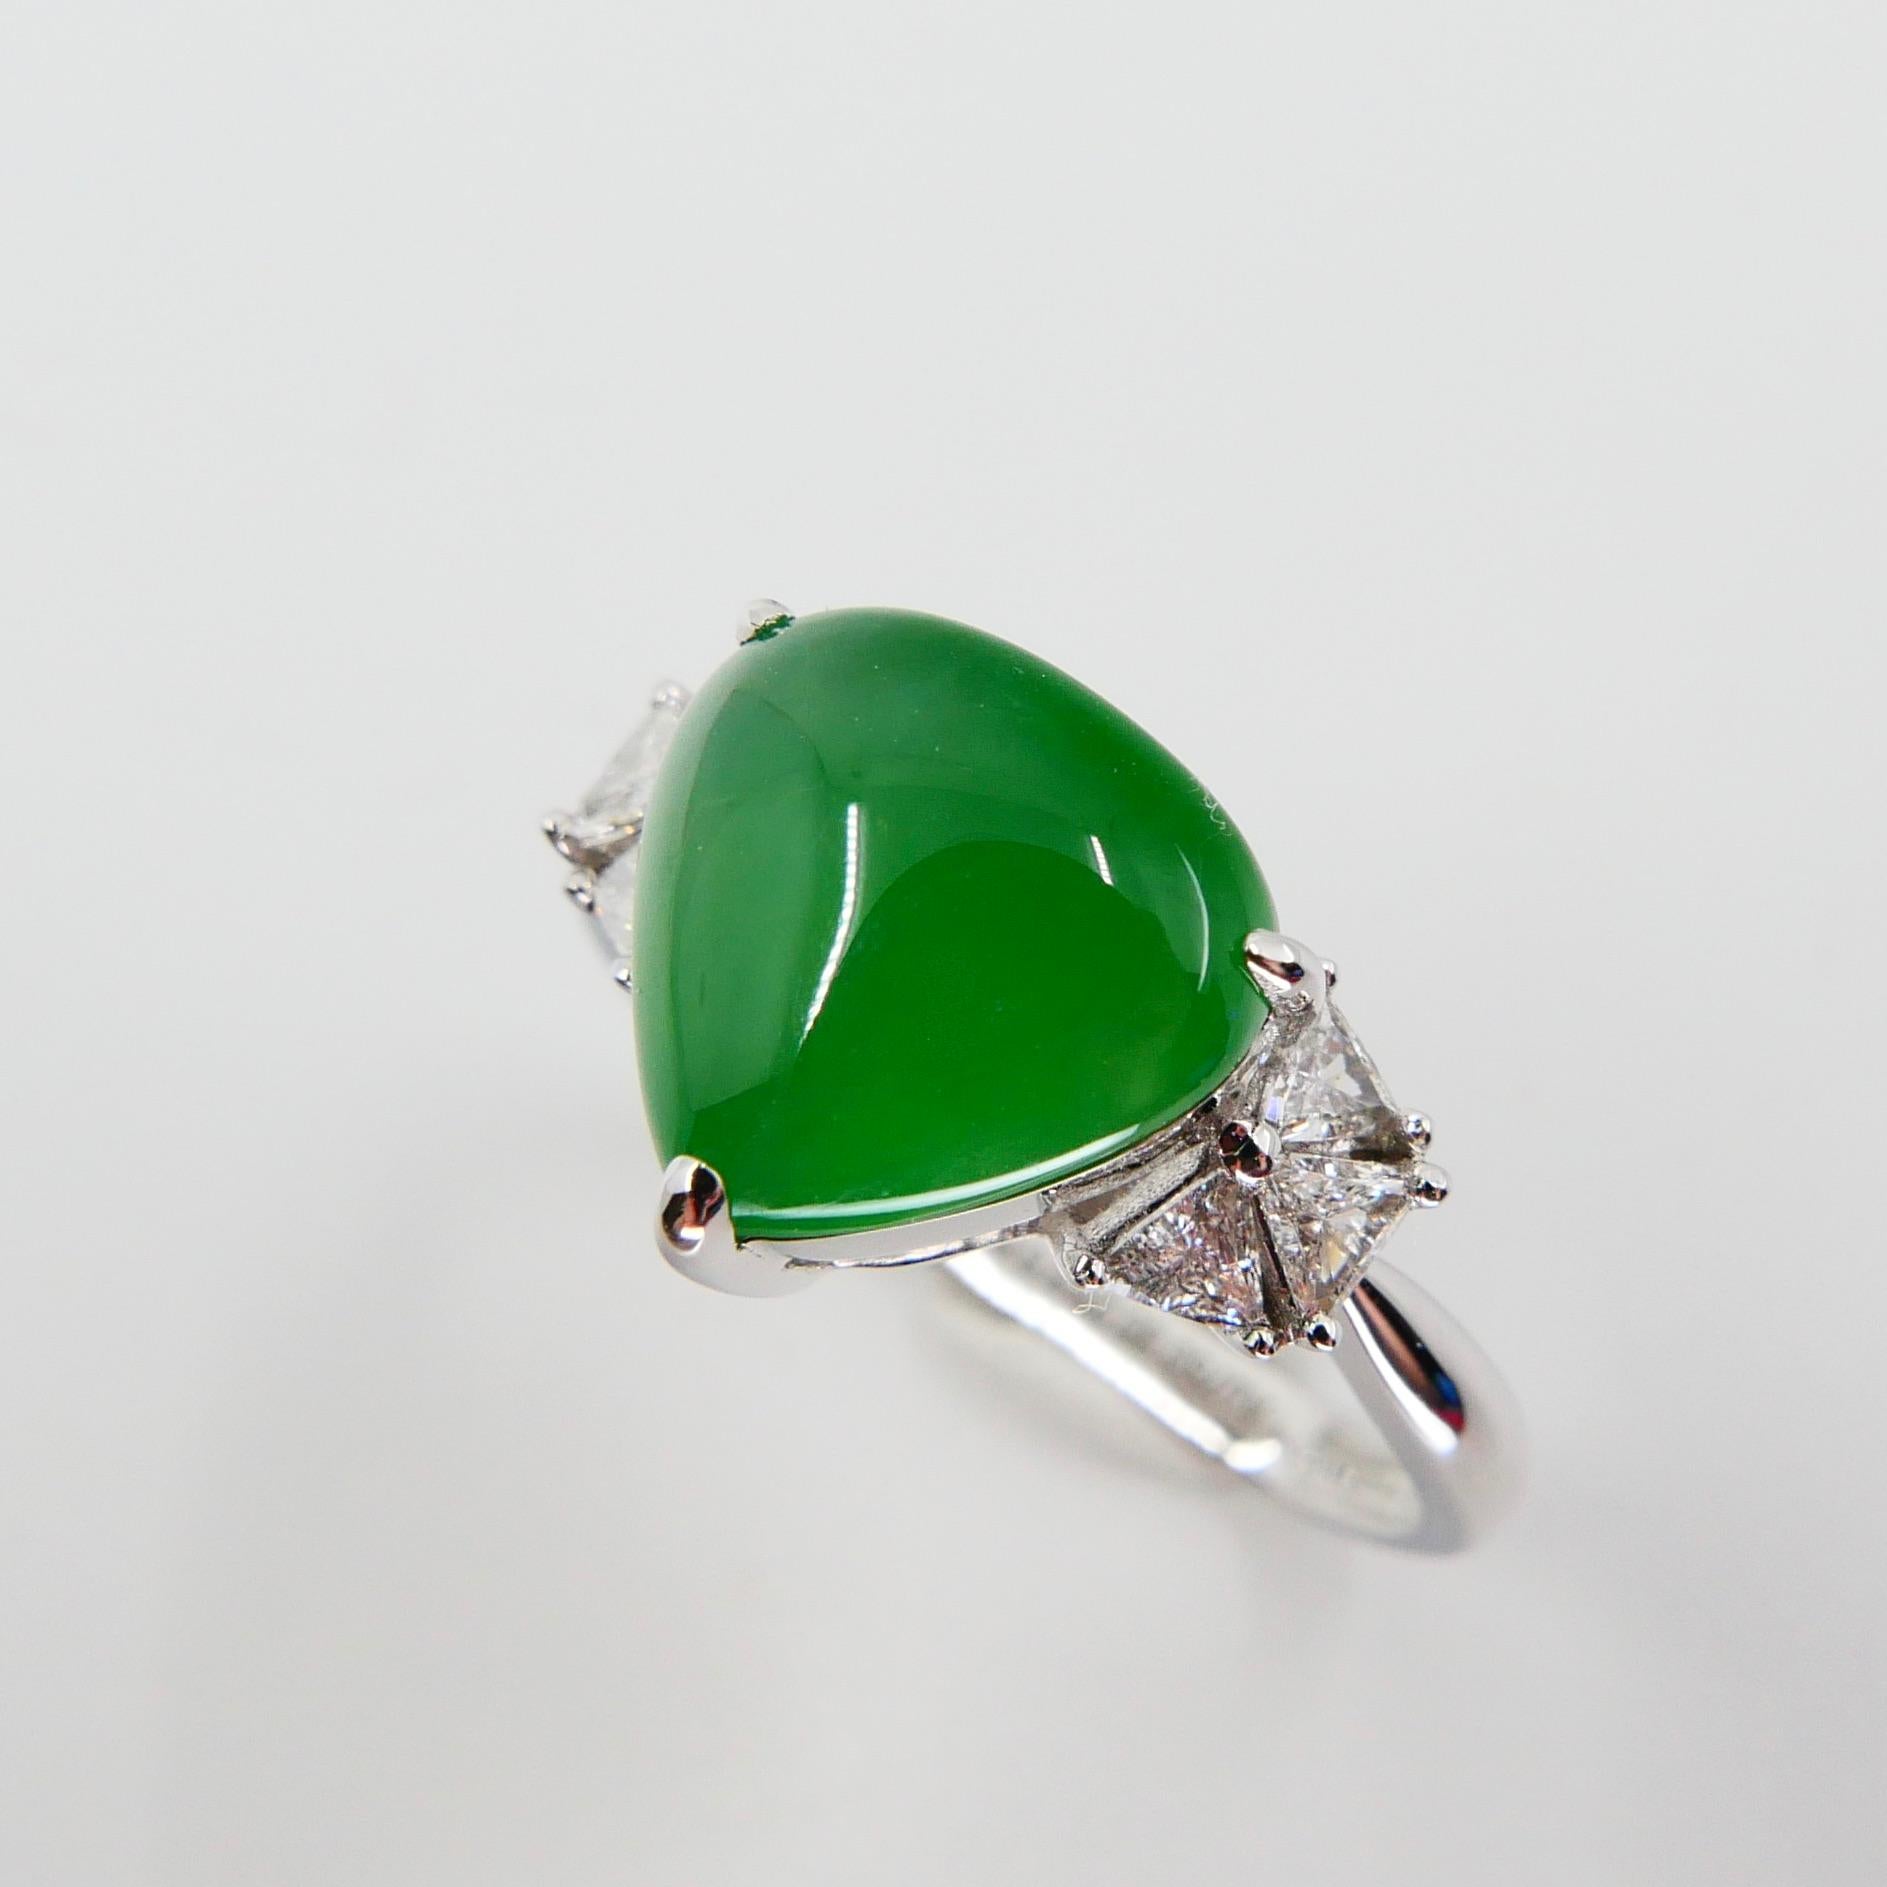 Certified Natural Type A Jadeite Jade & Diamond Cocktail Ring, Apple Green Color 1